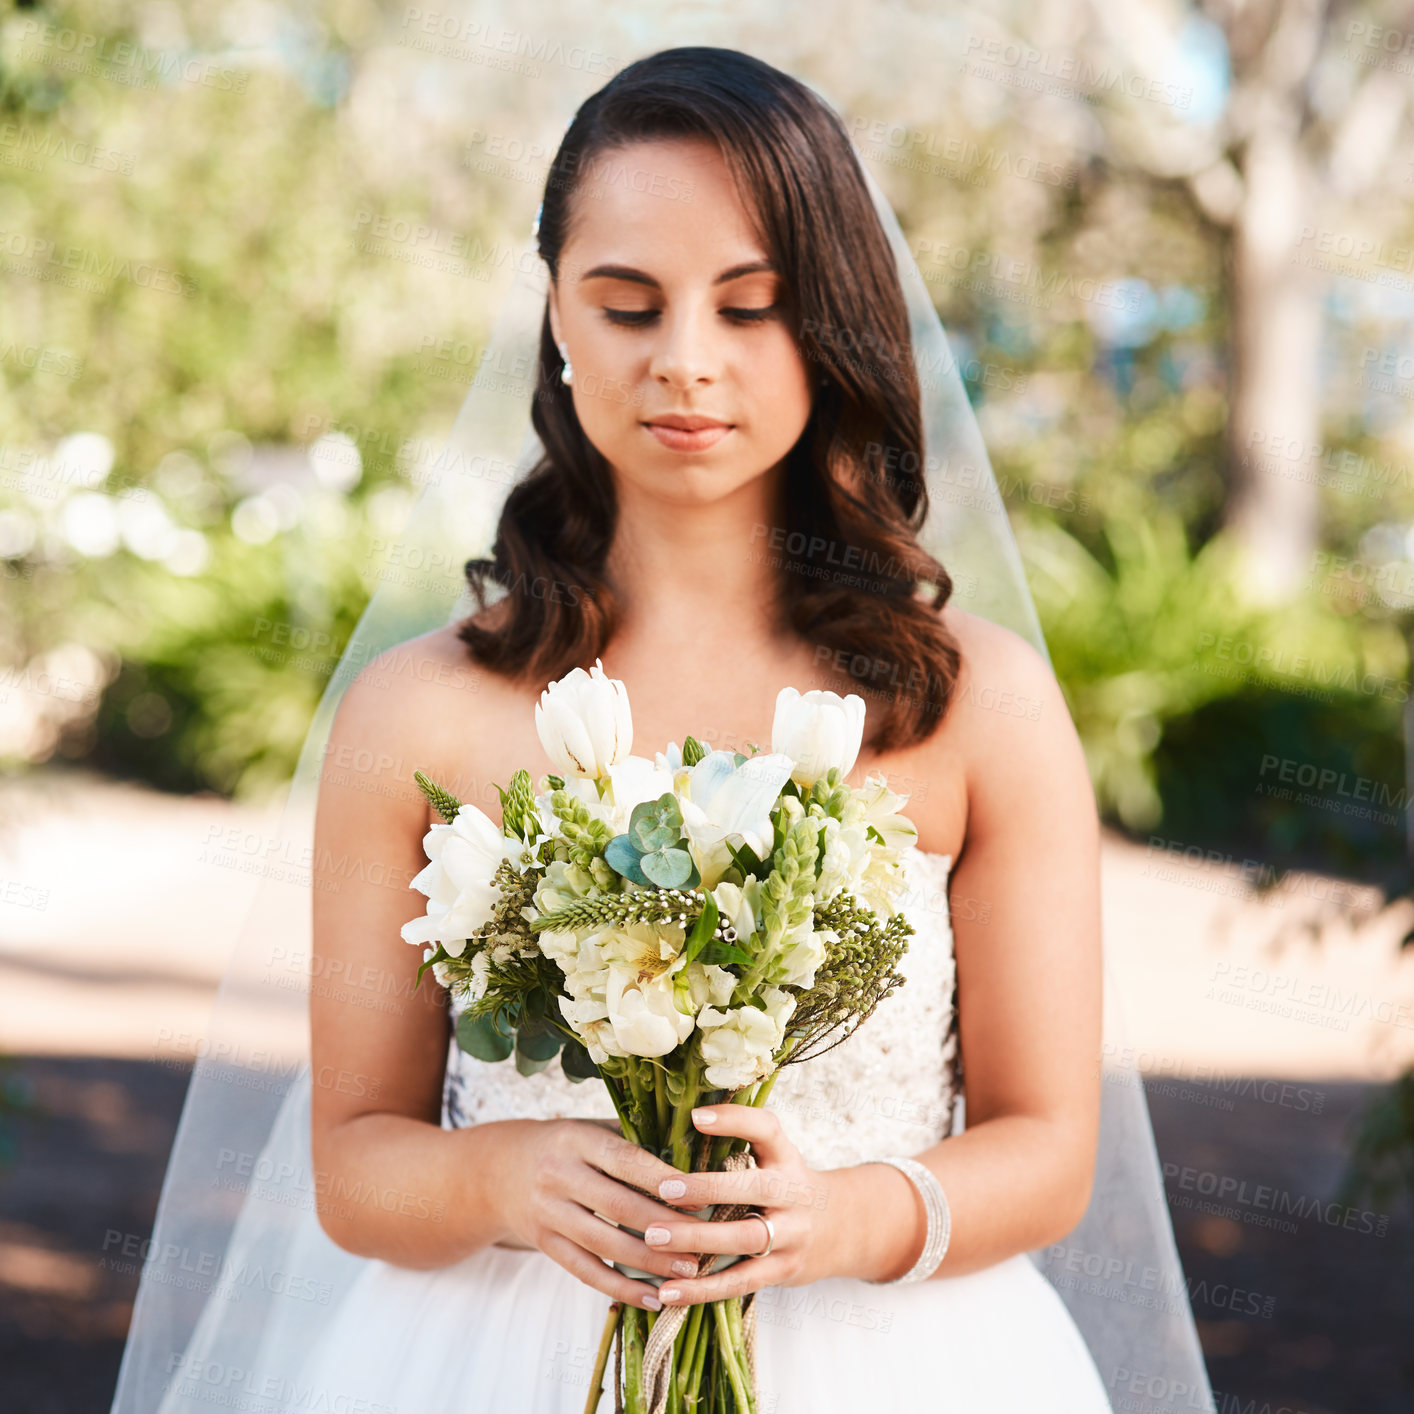 Buy stock photo Cropped shot of a beautiful young bride holding a bouquet of flowers while standing outdoors on her wedding day